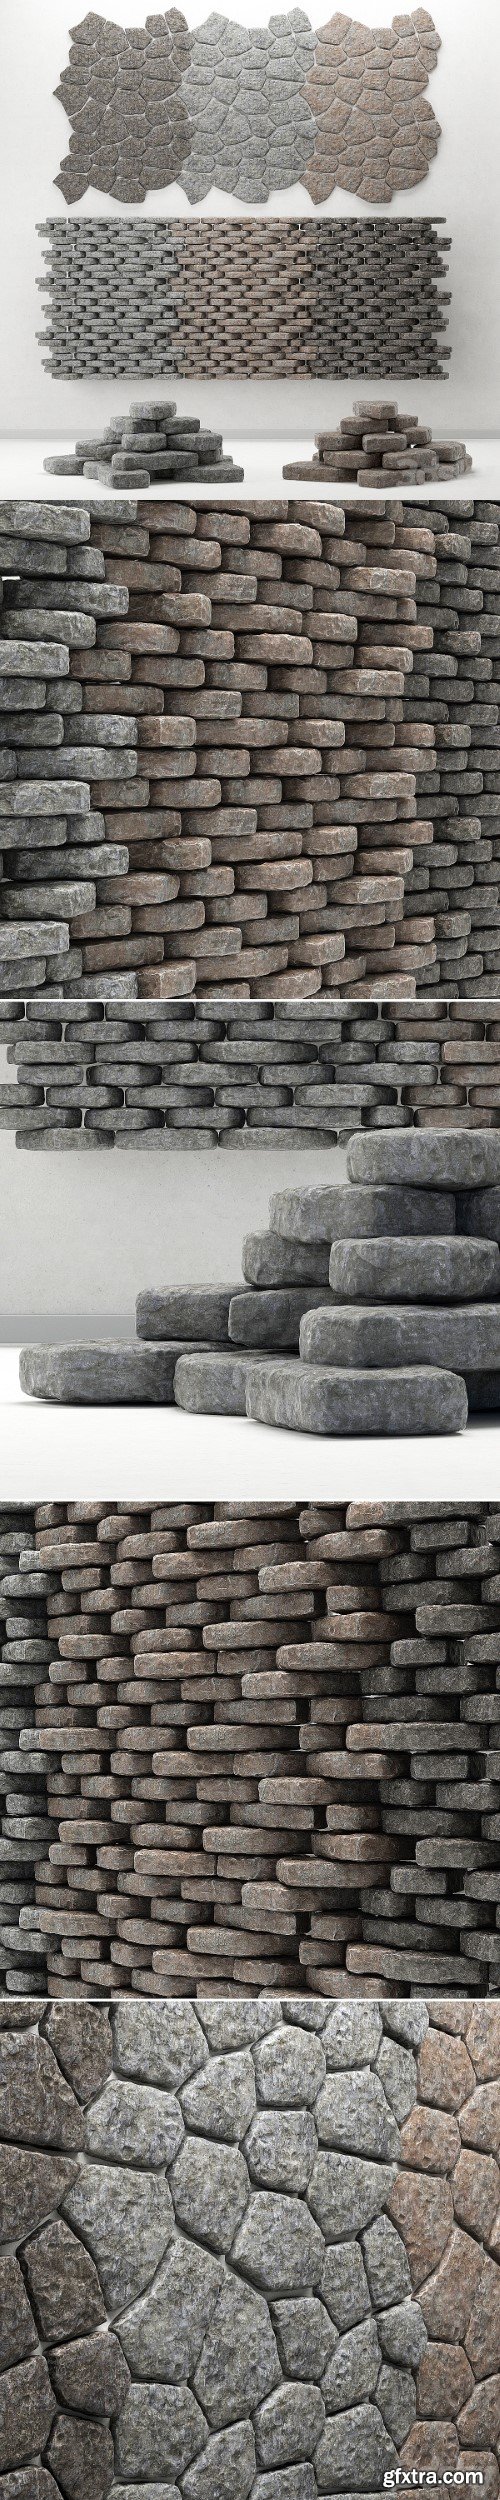 Rock stone collection decorative / A collection of rock for decoration